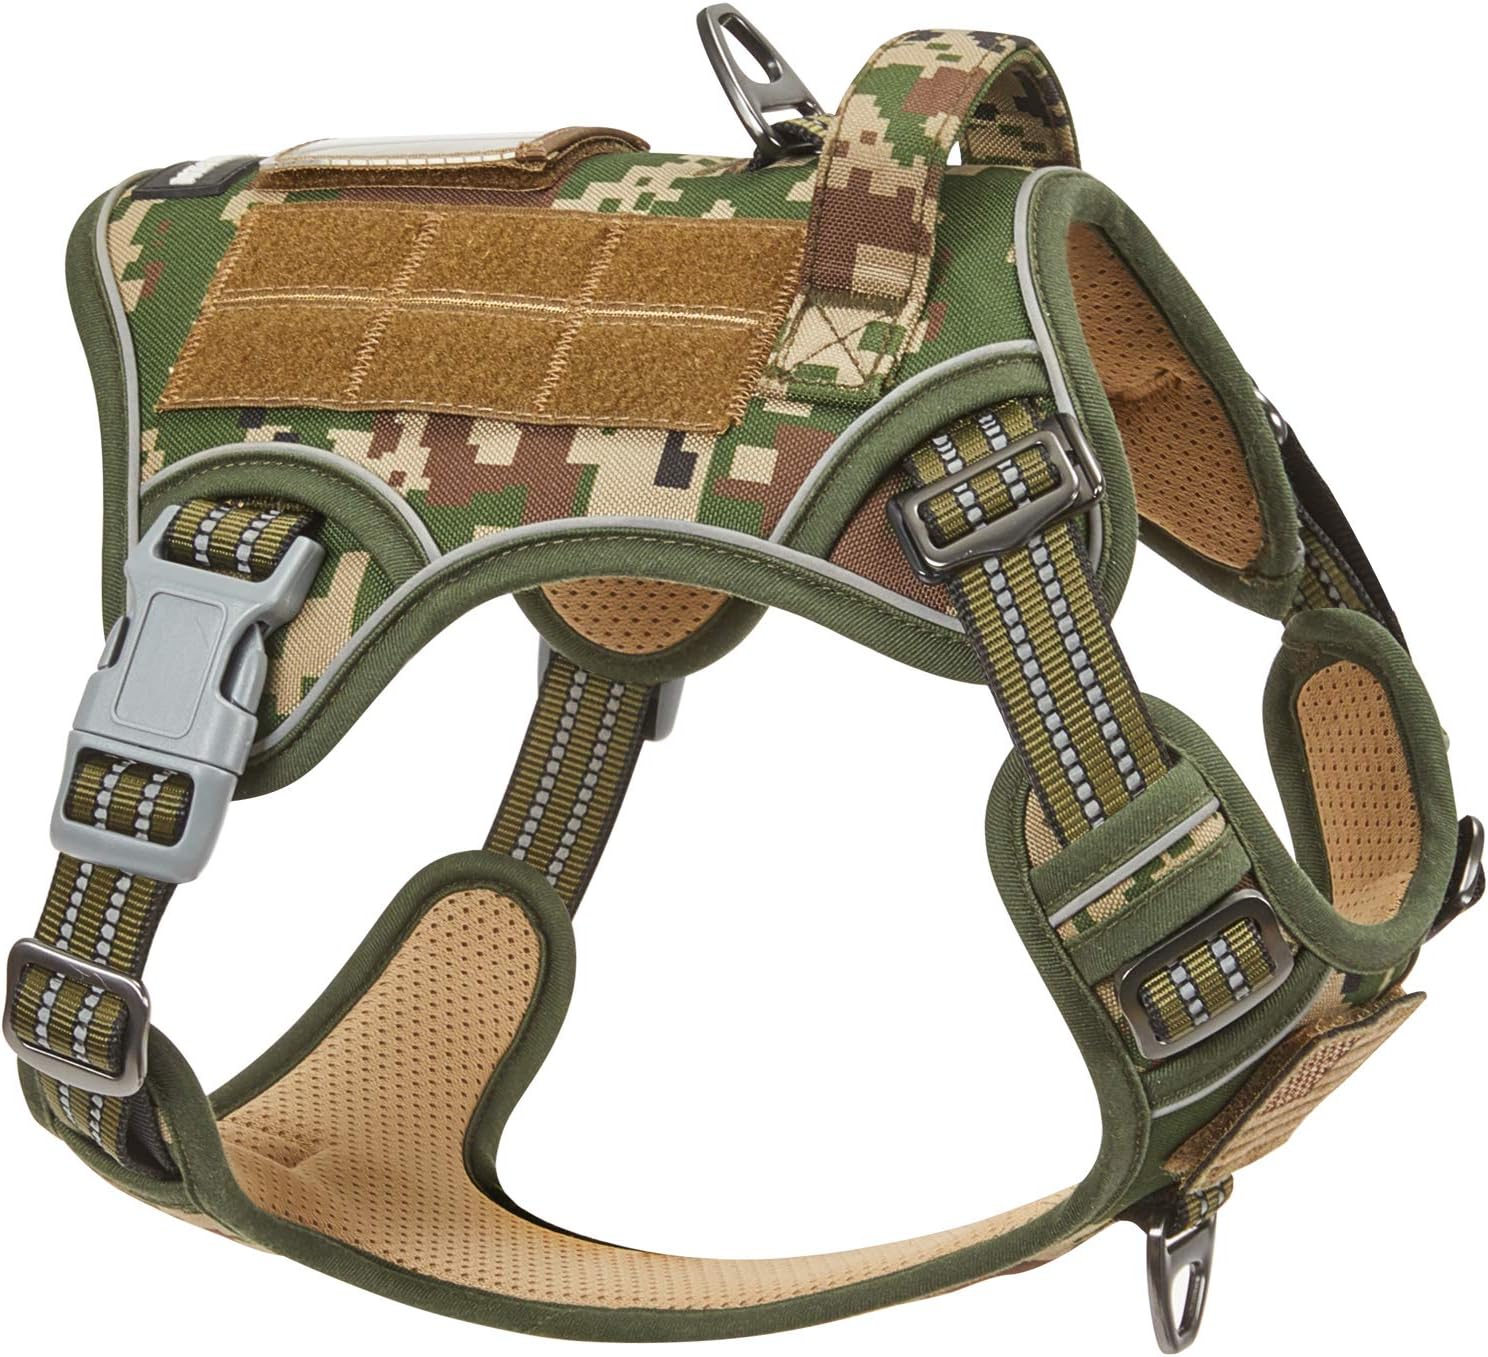 BUMBIN Tactical Dog Harness for Large Dogs No Pull, Famous TIK Tok No Pull, Fit Smart Reflective Pet Walking Harness for Training, Adjustable Dog Vest Harness with Handle Brown L